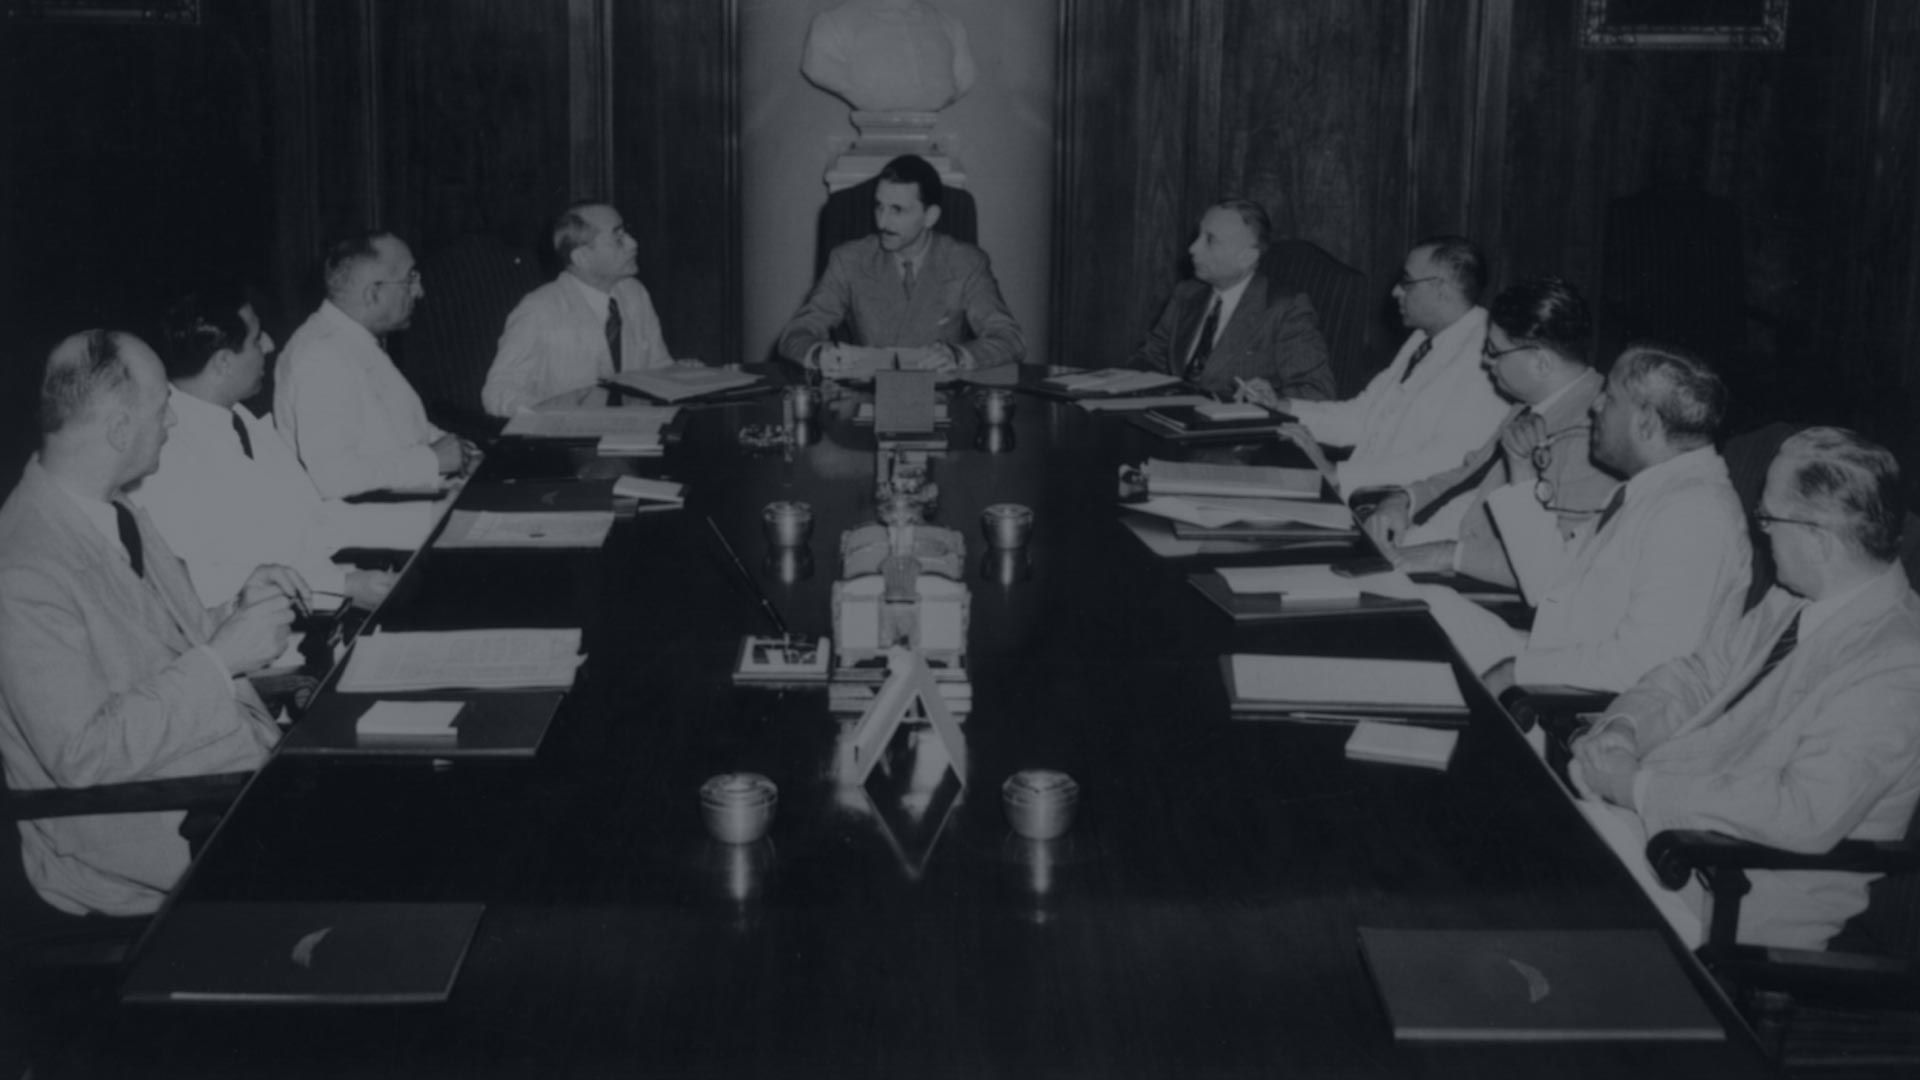 JRD Tata led the group as chairman for over half a century